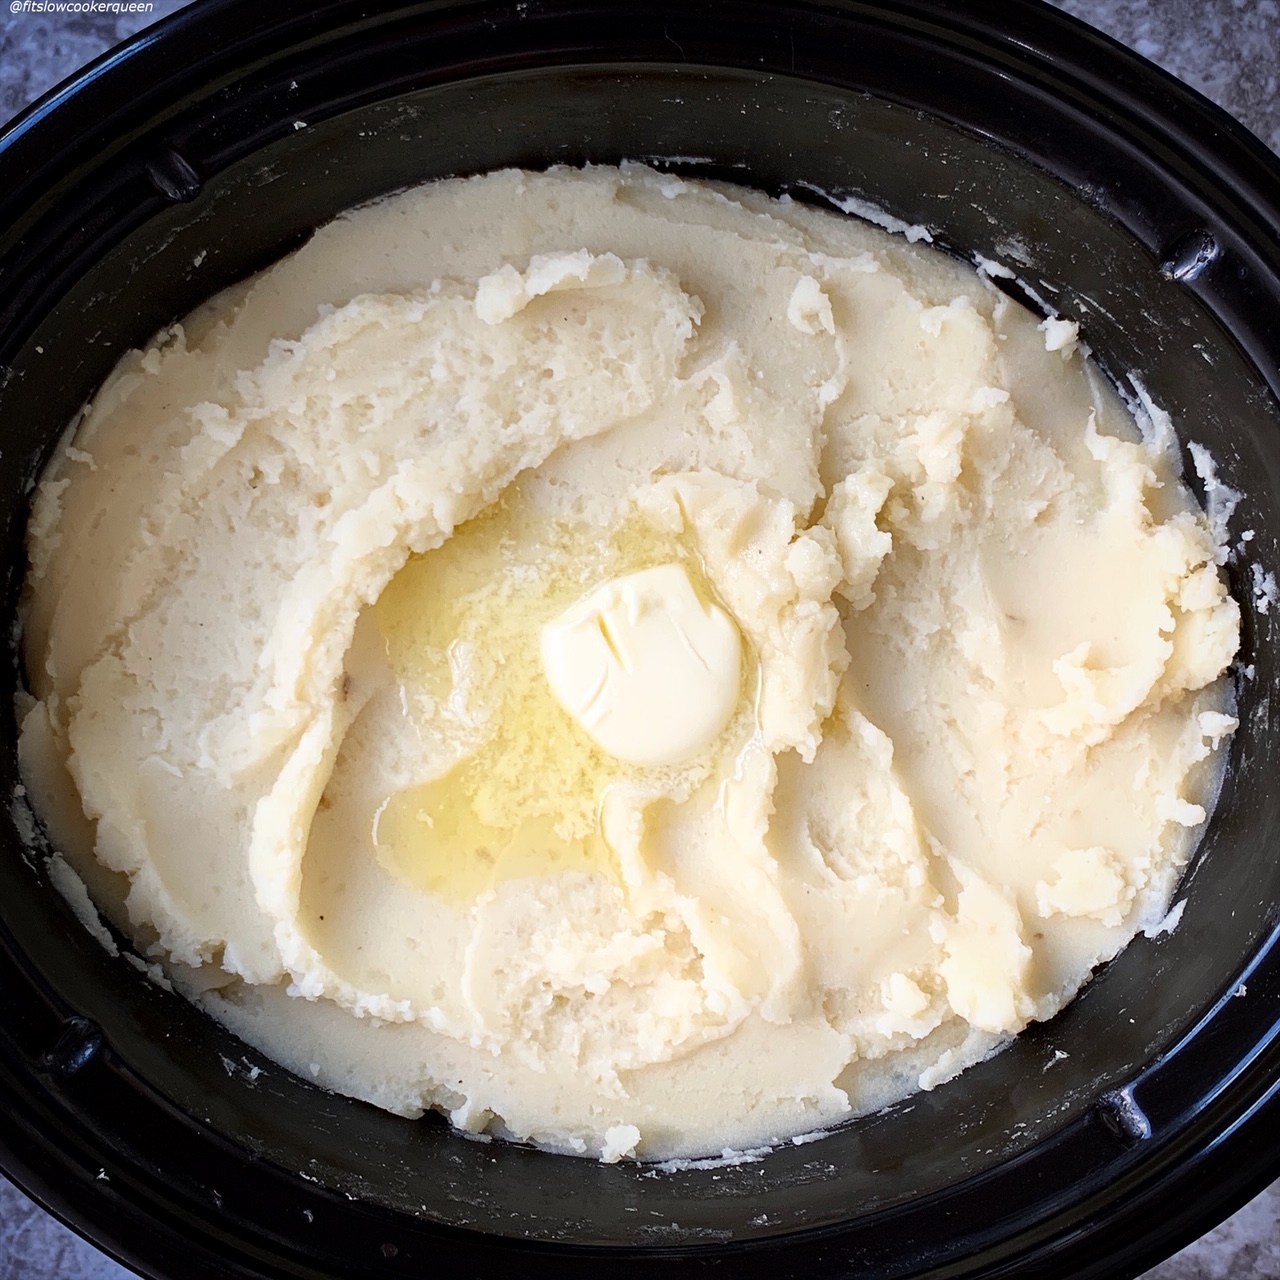 cooked potatoes in the slow cooker that have been mashed with a tablespoon of butter on top